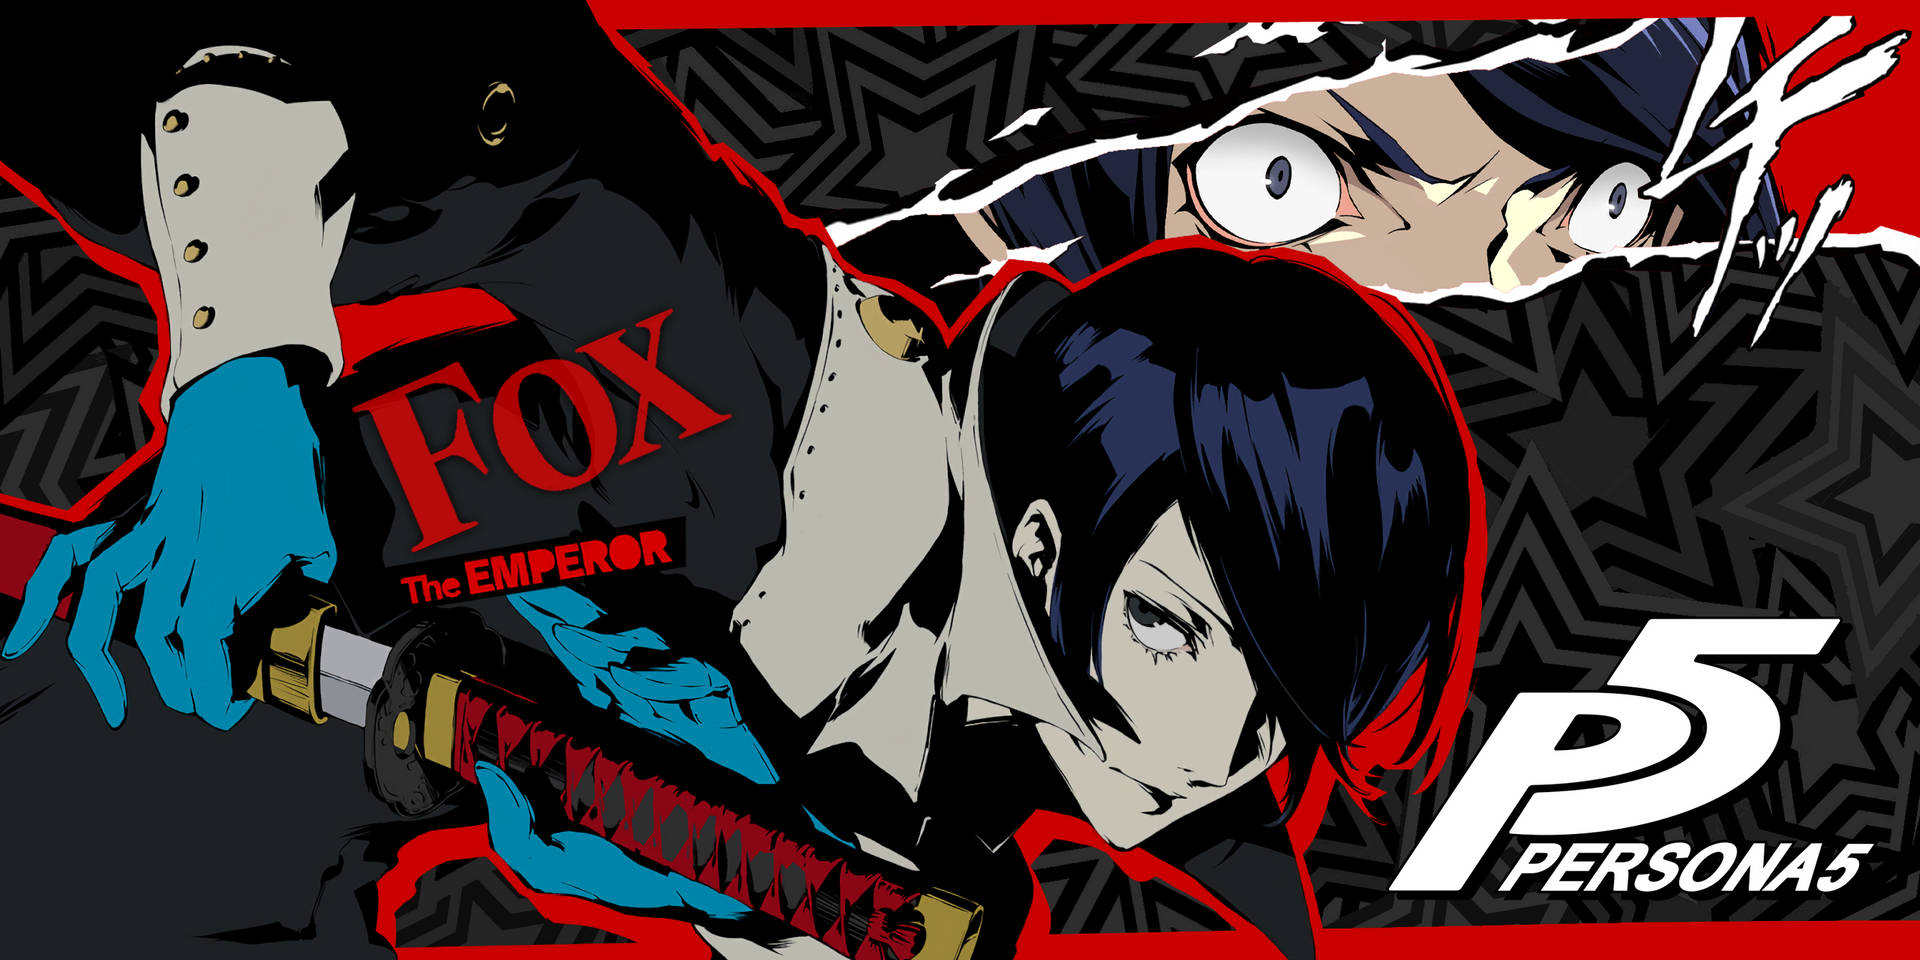 Ready for the Fight: Yusuke Kitagawa of Persona 5 Wallpaper